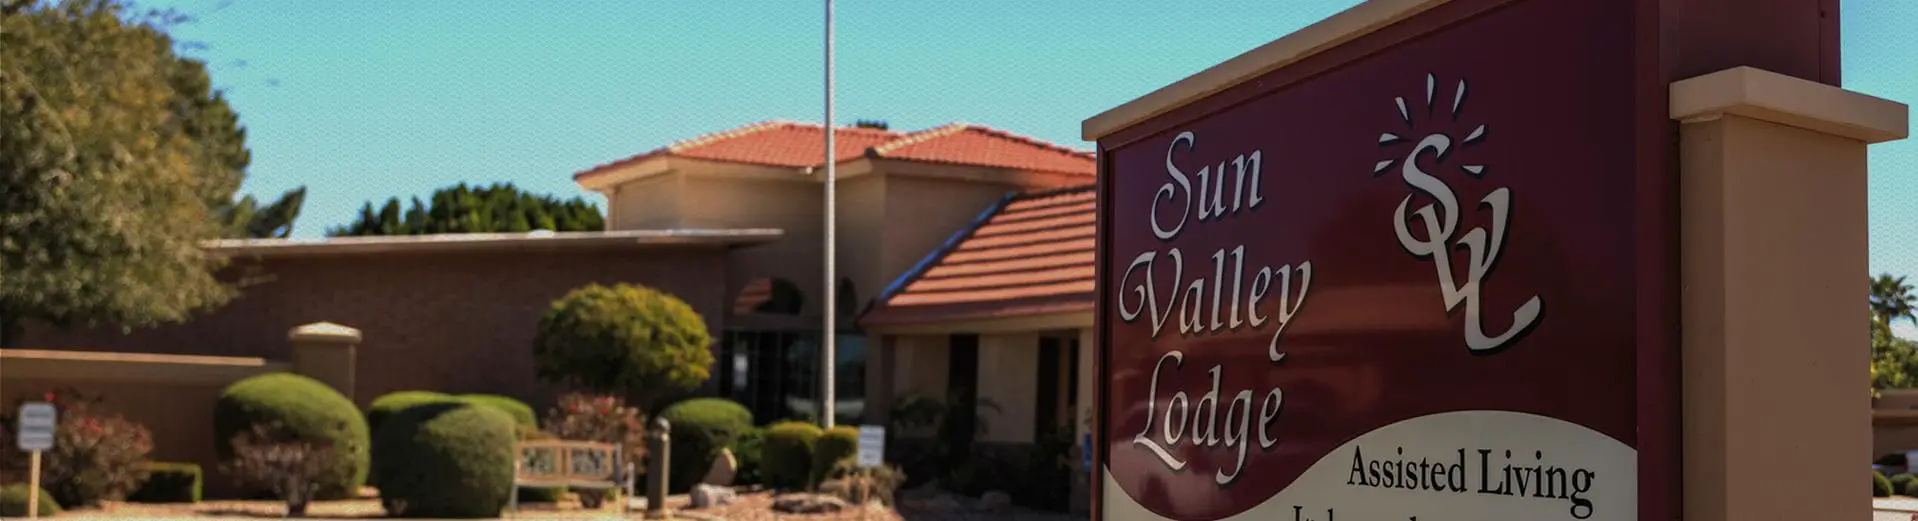 Photo of Sun Valley Lodge Retirement Community, Assisted Living, Nursing Home, Independent Living, CCRC, Sun City, AZ 1